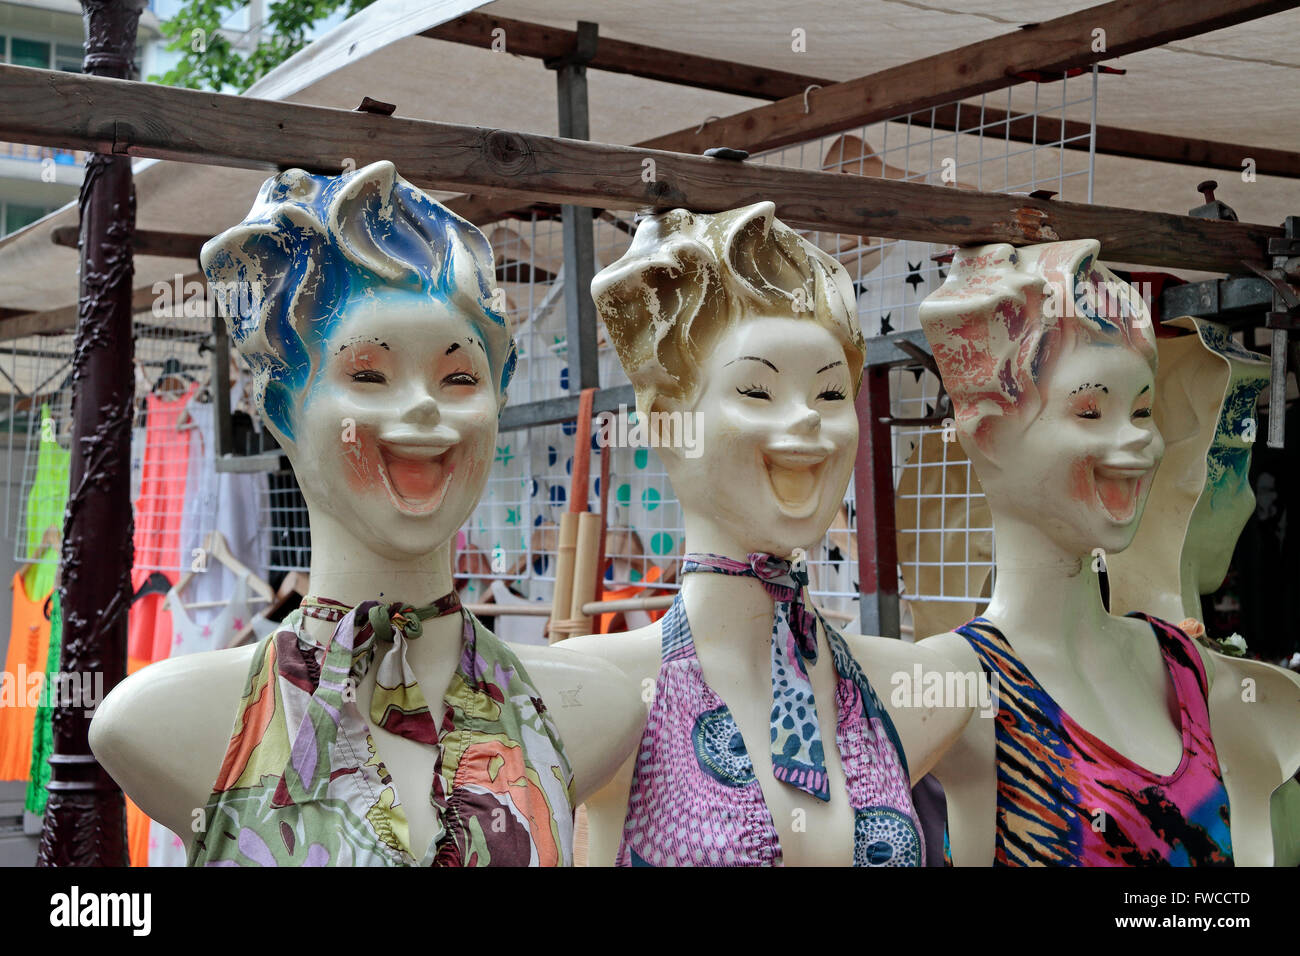 Three creepy looking mannequin faces on a market stall in Amsterdam, Netherlands. Stock Photo